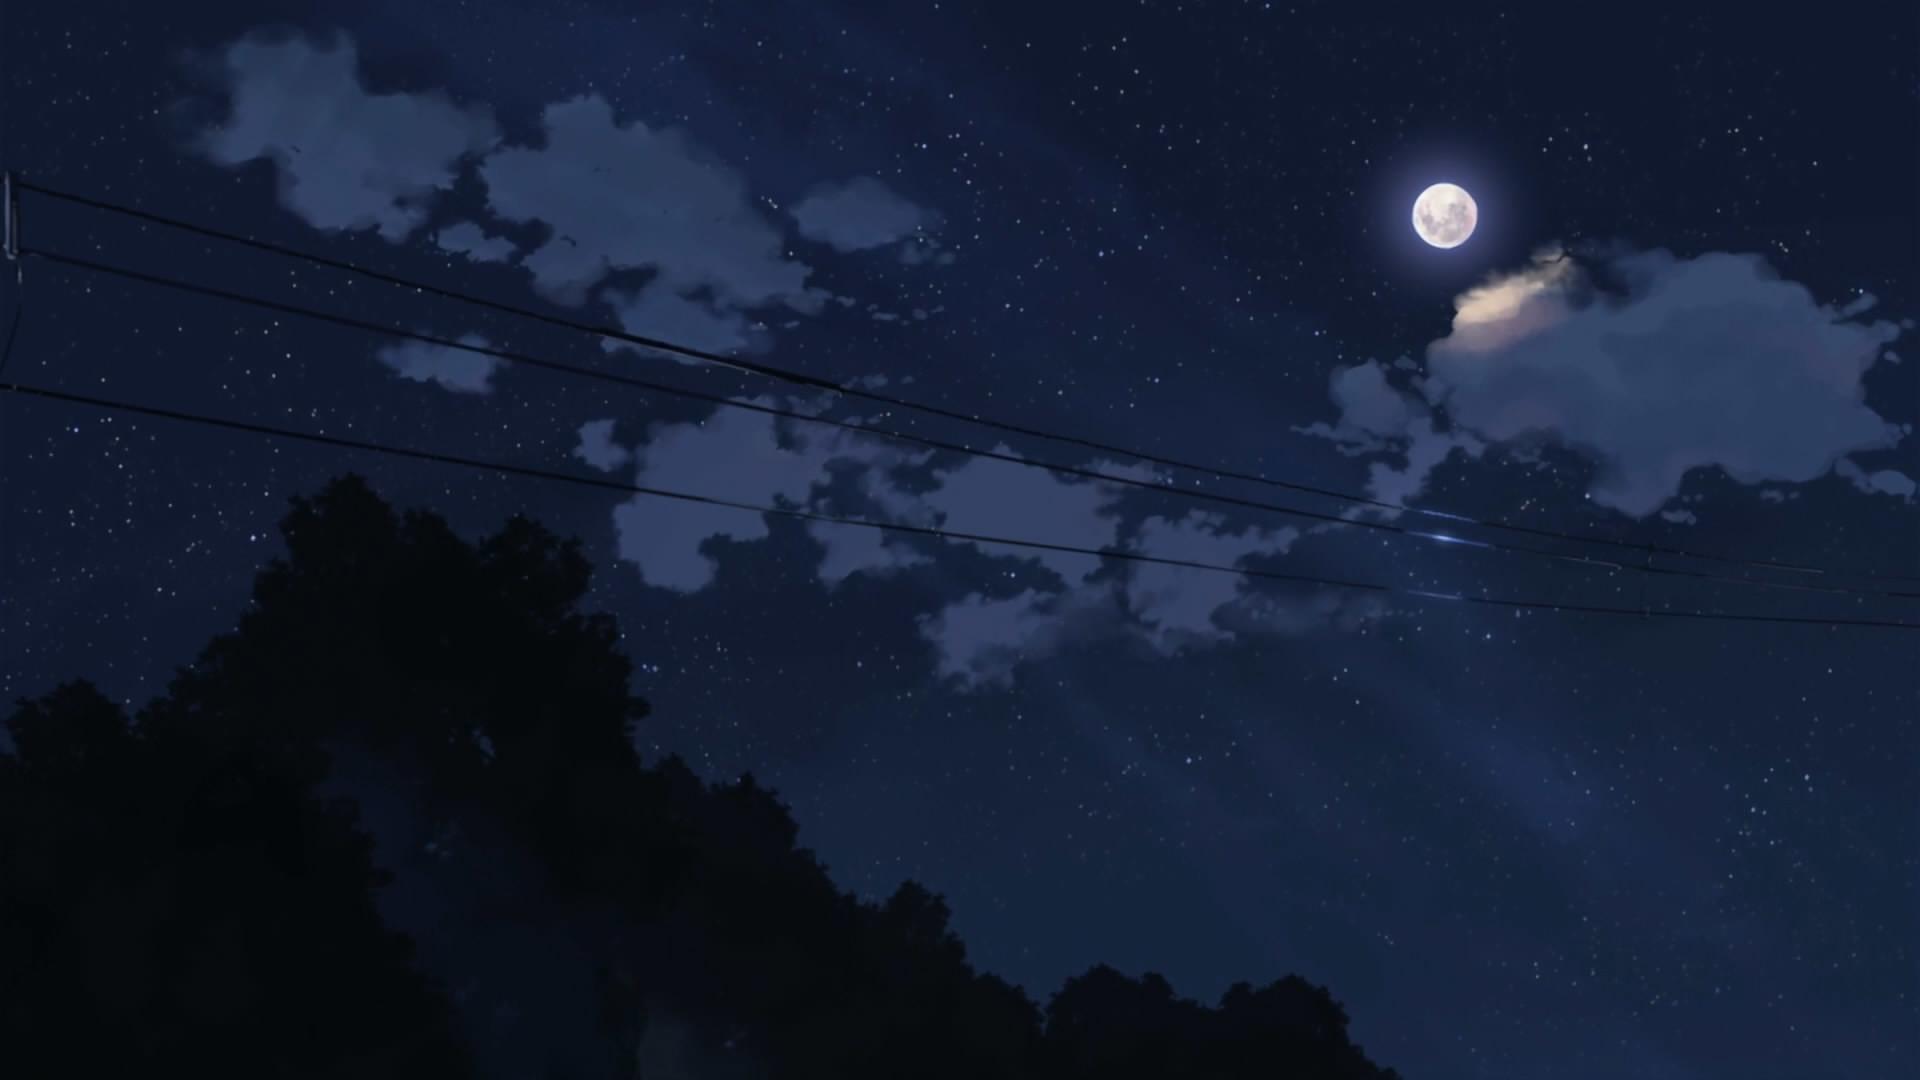 1920x1080 anime night sky wallpaper download this wallpaper use this wallpaper - Night